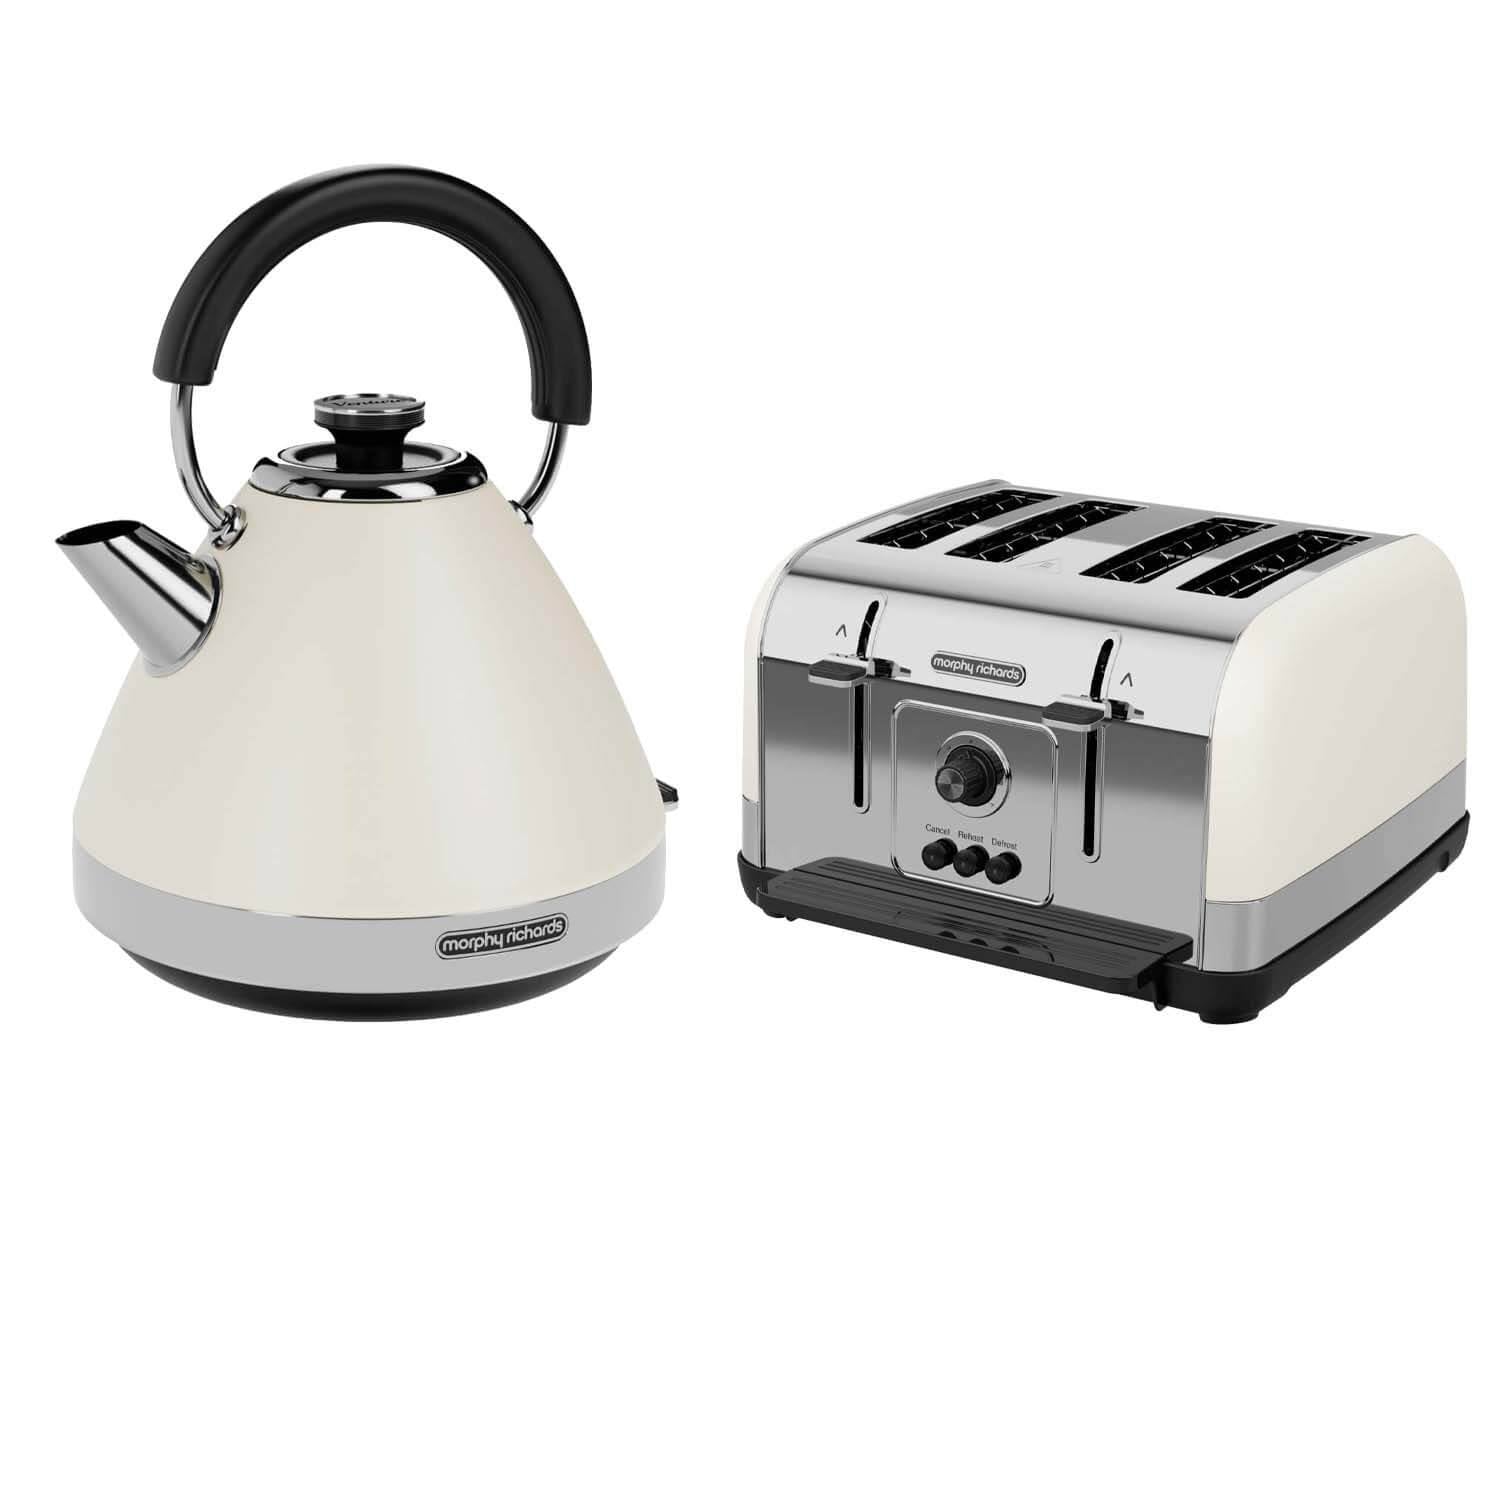 http://cdn.shopify.com/s/files/1/1710/5145/products/morphy-richards-100132-venture-pyramid-kettle-and-240132-venture-4-slice-toaster-Set-cream.jpg?v=1659524505